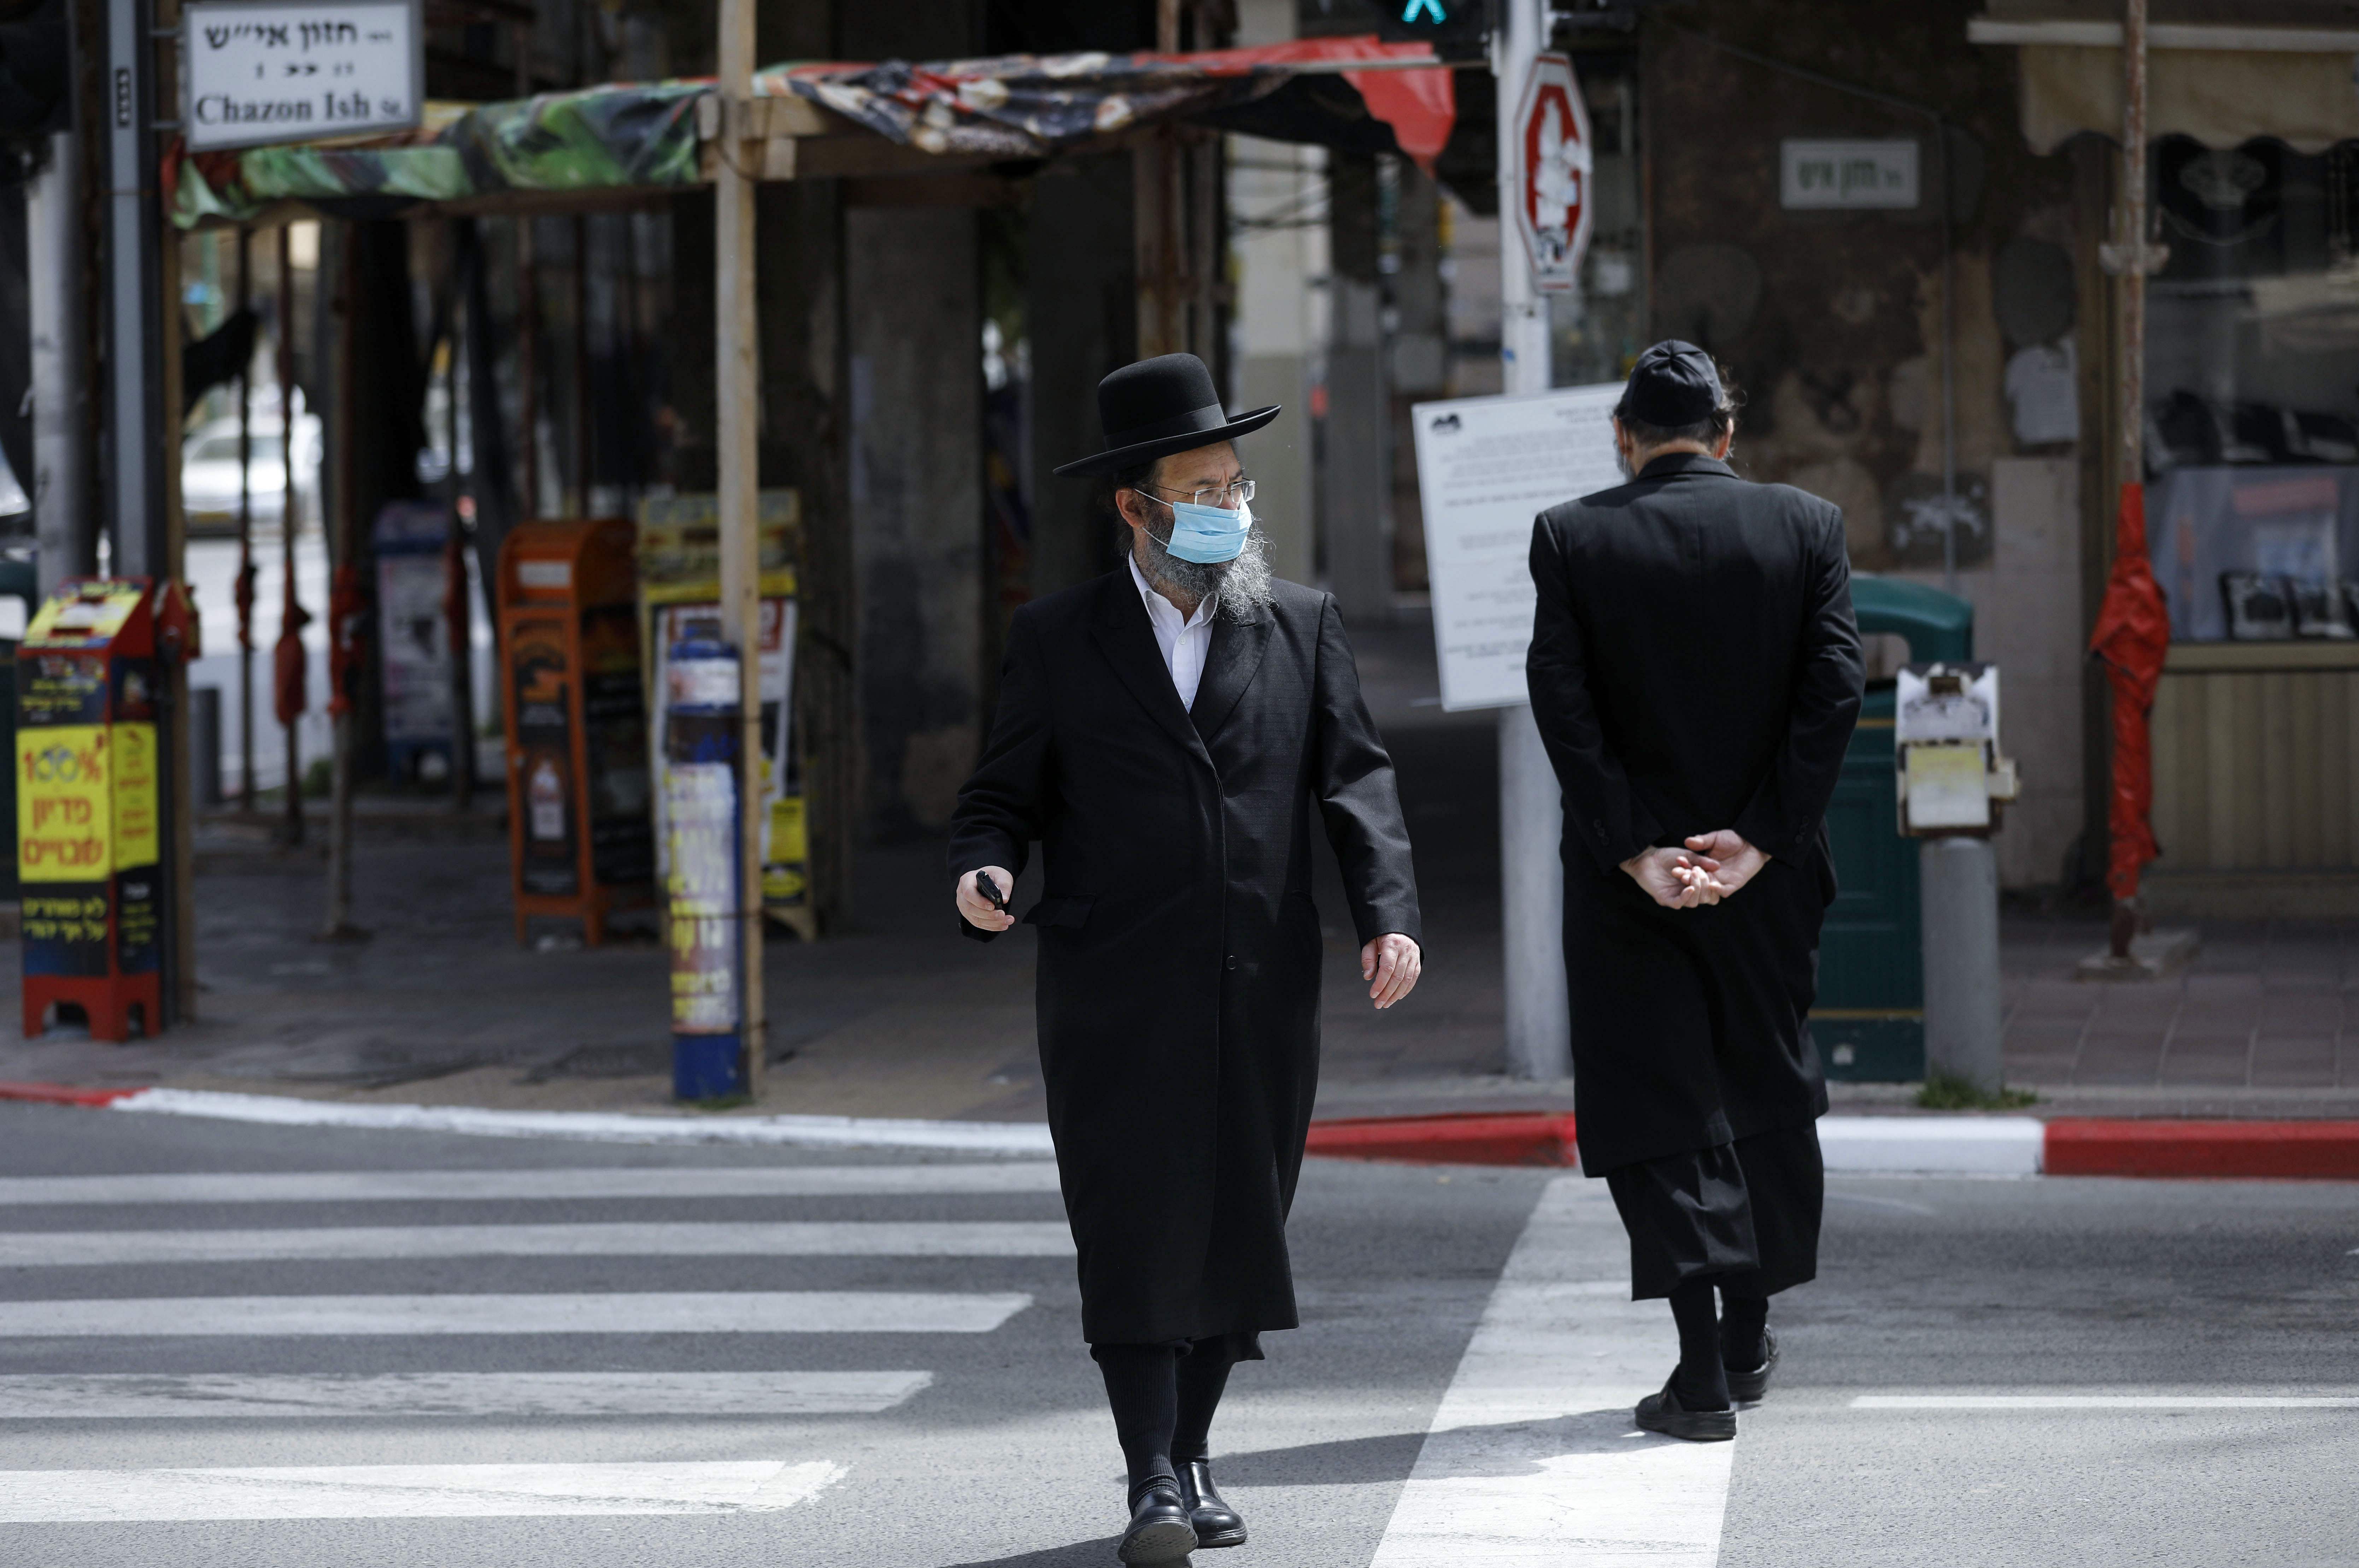 An ultra-Orthodox Jewish man wearing a protective mask crosses a street in the religious Israeli city of Bnei Brak, near Tel Aviv. (Credit: AFP)